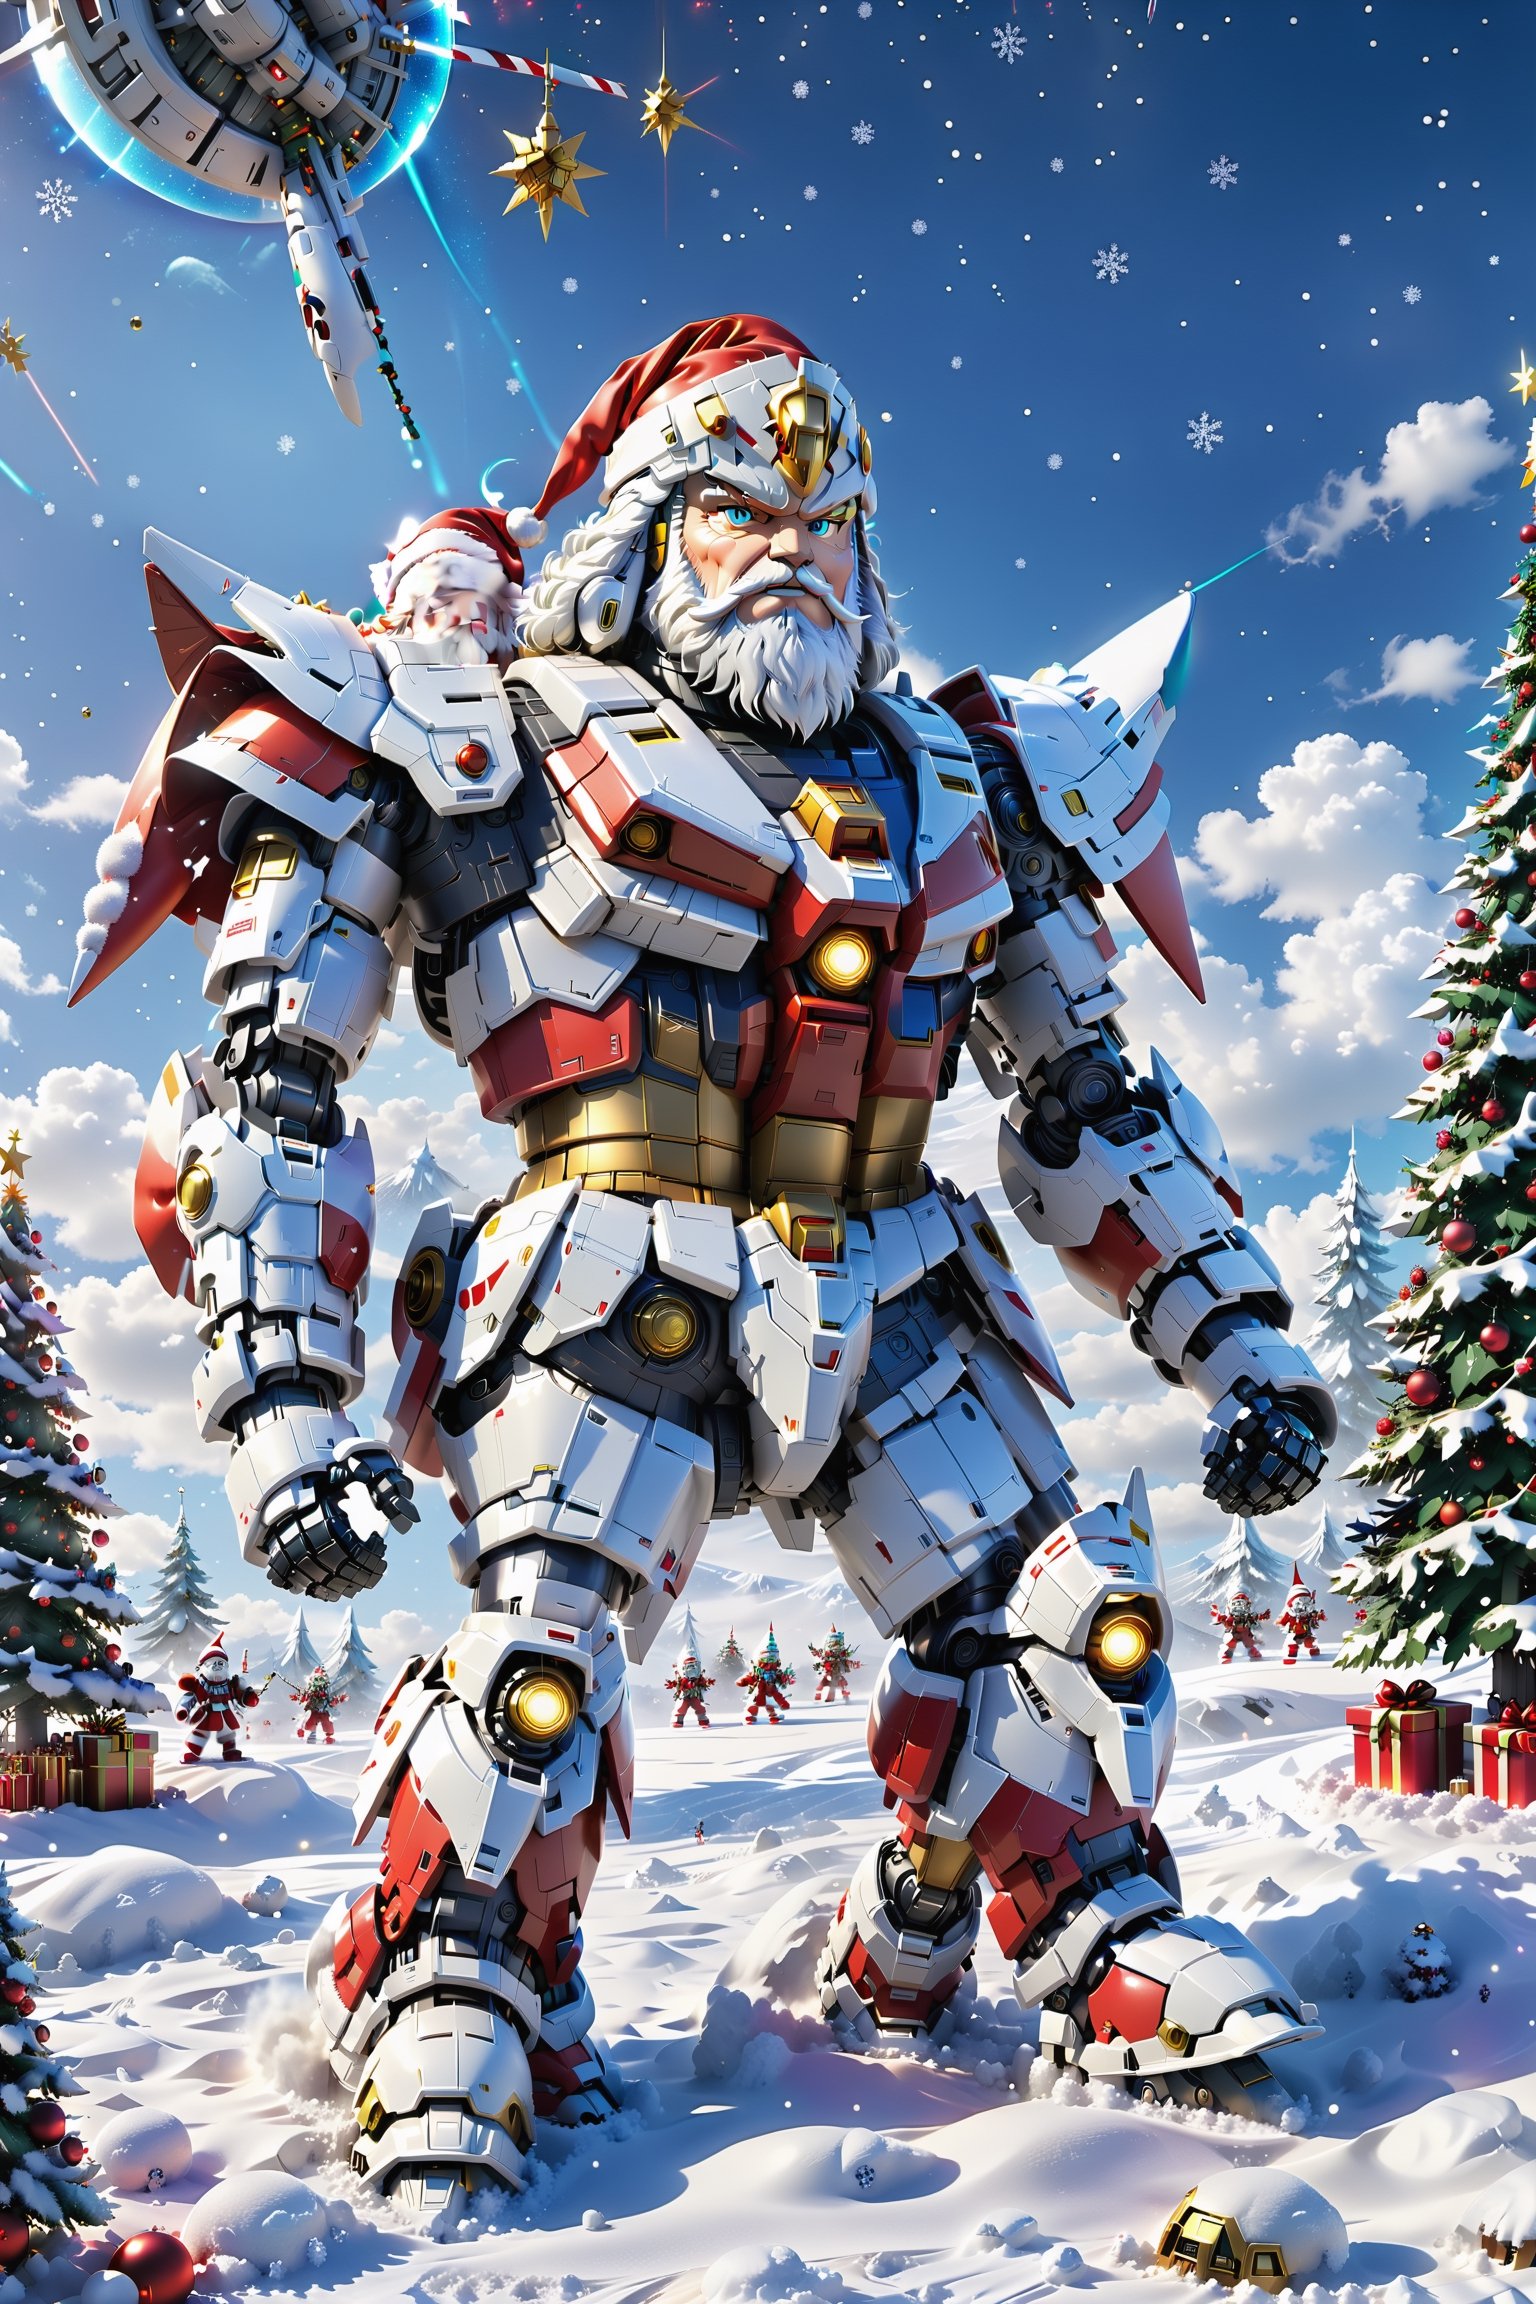 In this scene where futuristic technology meets Christmas tradition, Santa Claus sits in a huge Gundam mech, presenting a unique and stunning image.

The Gundam mech's exterior design is futuristic, with a body made of metal alloy and painted in bright Christmas red and snow white. The mech's limbs are dotted with colored lights, as if it were a walking Christmas tree. The head was uniquely shaped with a glowing Christmas hat, adding a festive atmosphere to the entire mech.

Santa Claus sat in the cockpit of the mech, the joystick and control panel covered with complicated buttons and screens, holding a glowing controller in his hand, seemingly infusing the Gundam mech with the magical power of Christmas. His expression was one of kindness and determination, as if he was sending holiday wishes to the world.

This Gundam mecha marched through the snow, leaving deep tracks. The surrounding snowflakes were squeezed into a flurry under the mech's huge feet, as if everywhere the mech drove through was transformed into a Christmas wonderland. The starry sky in the background adds a magnificent atmosphere to this scene full of technology and mystery. The whole picture shows the perfect combination of future technology and traditional festivals, letting people feel a unique Christmas adventure.